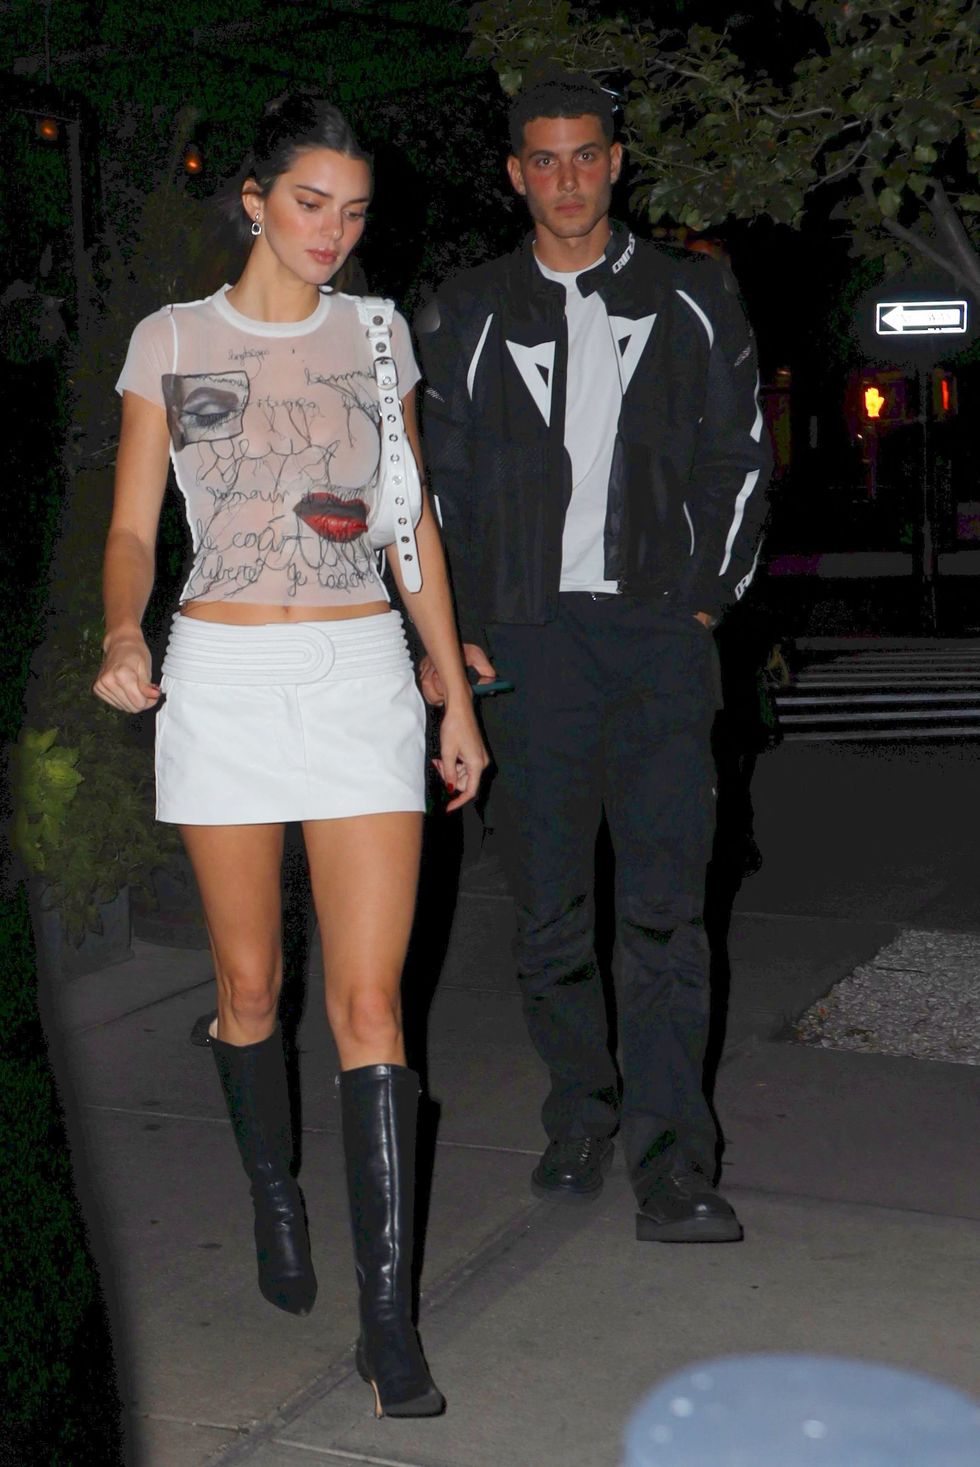 exclusive kendall jenner seen leaving her hotel with fai khadra 19 sep 2022 pictured kendall jenner and fai khadra photo credit eric kowalsky mega themegaagencycom 1 888 505 6342